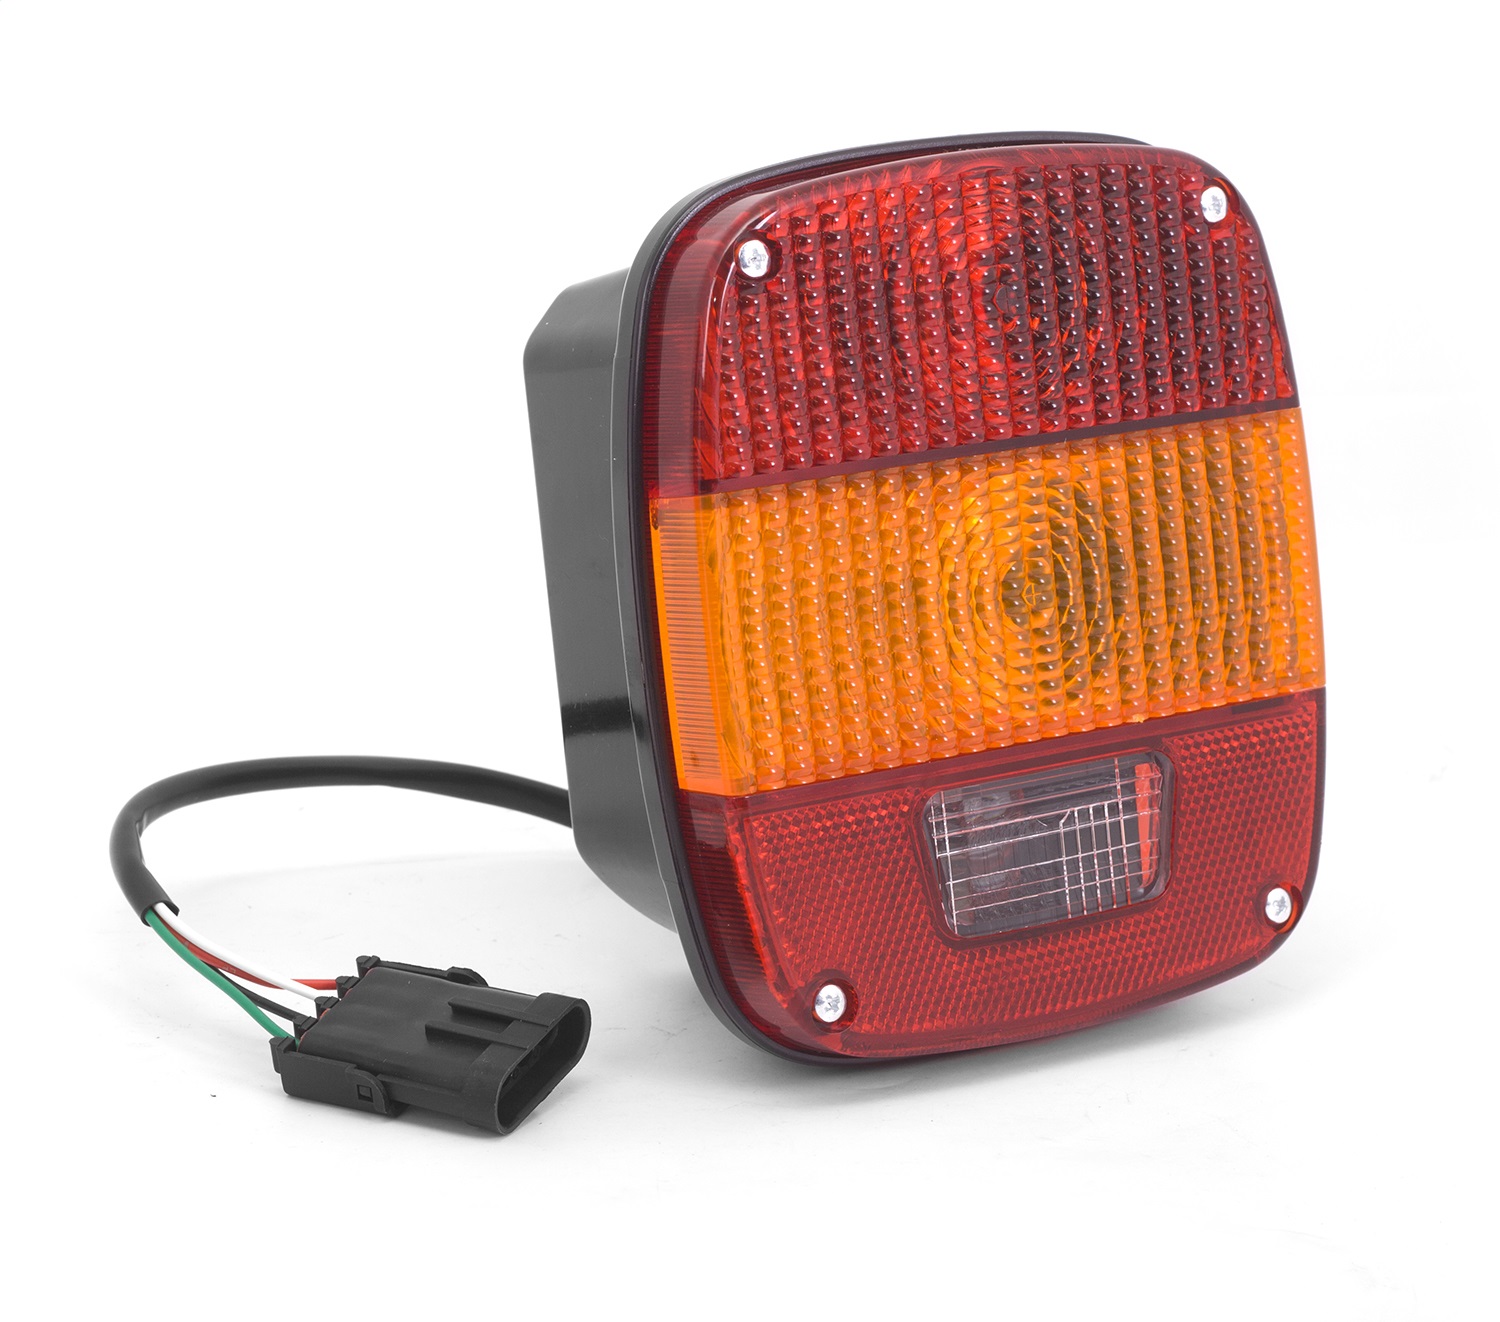 Replacement tail light from Omix-ADA, Fits 97-06 Jeep Wrangler TJ ., Fits left or right sides. Export models only